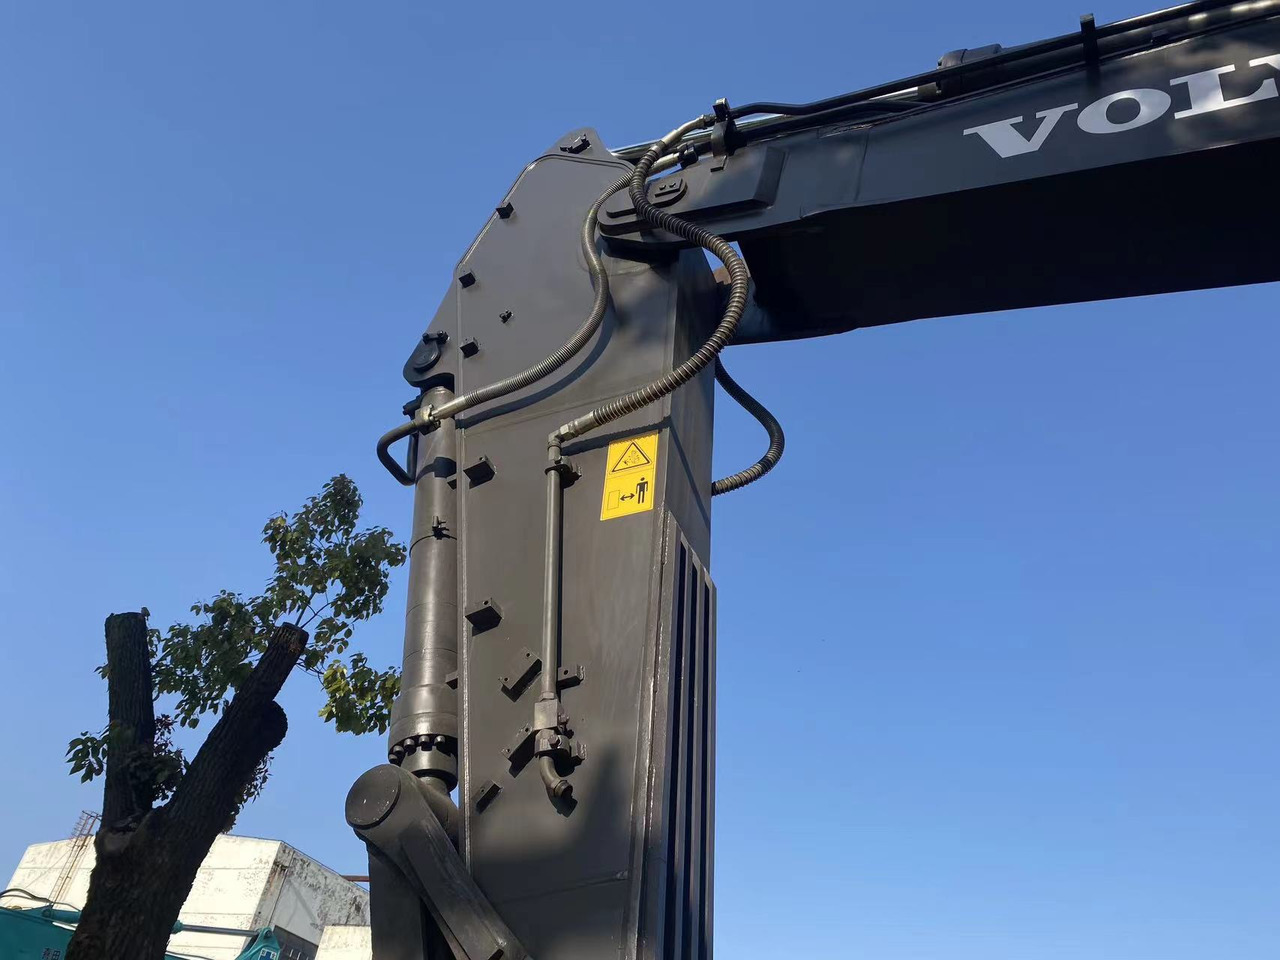 Hot selling original made Used excavator VOLVO EC480DL in stock low price for sale lizingą Hot selling original made Used excavator VOLVO EC480DL in stock low price for sale: foto 9